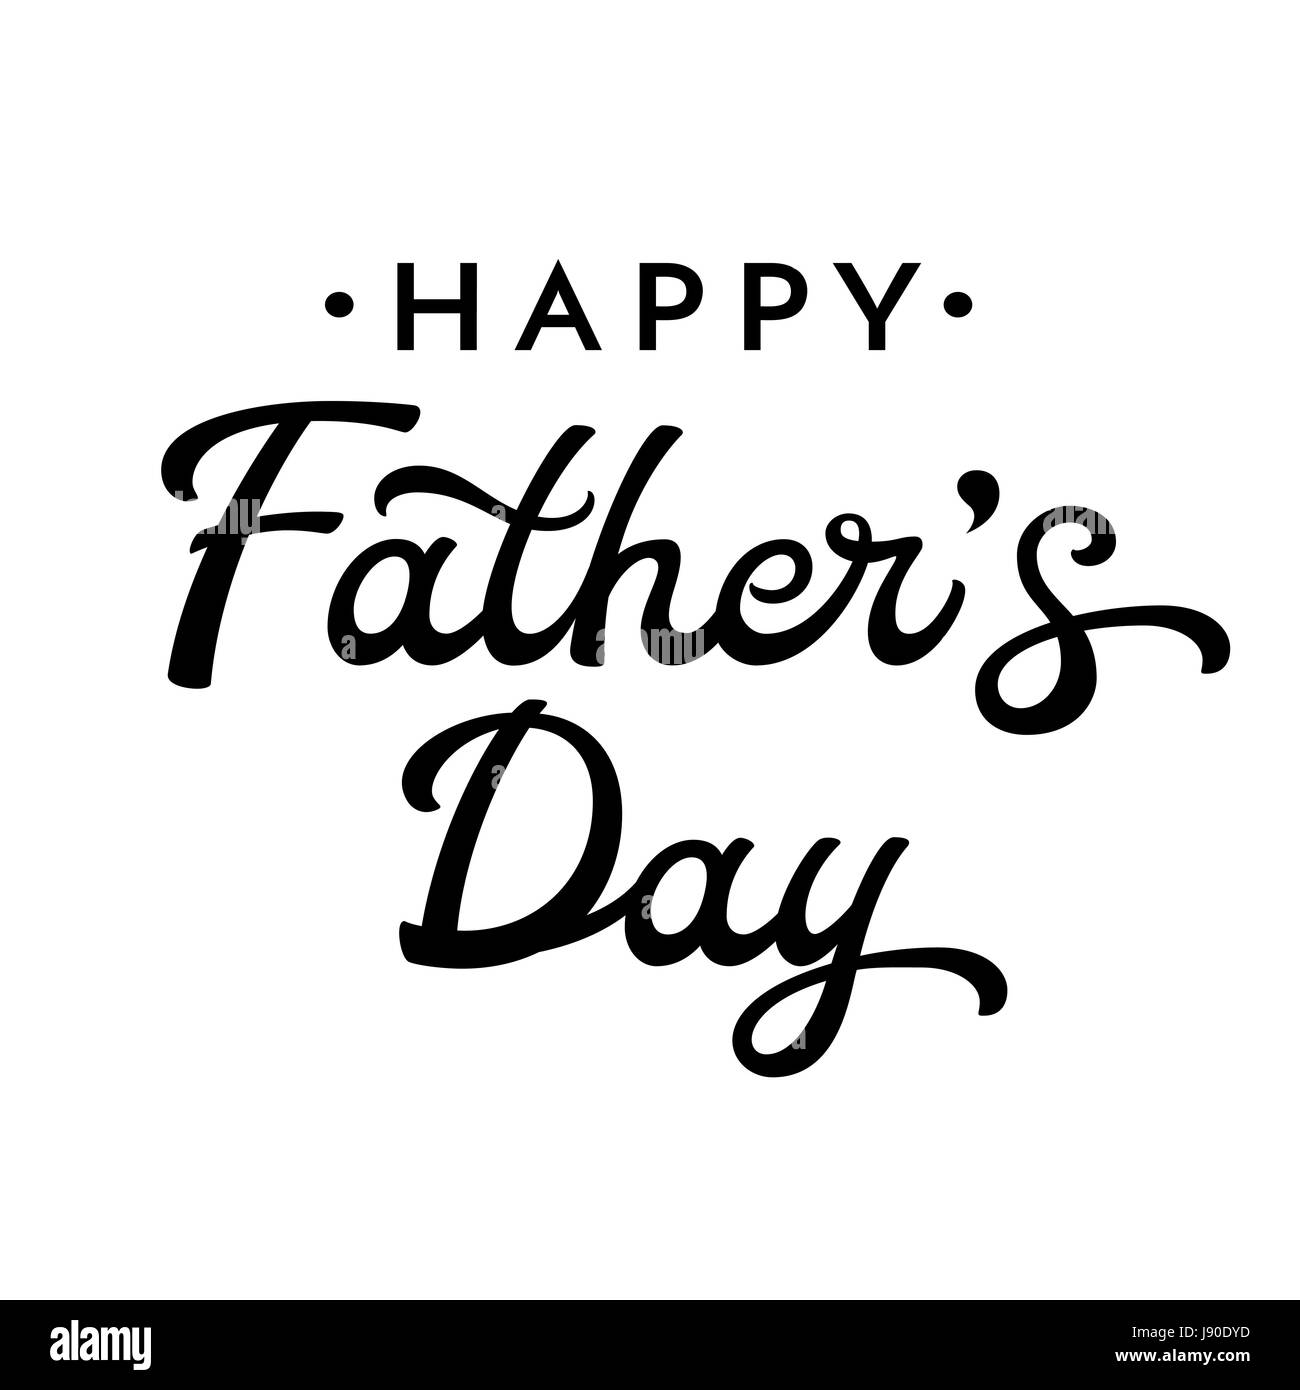 Happy Fathers Day brush lettering. Black letters isolated on white ...